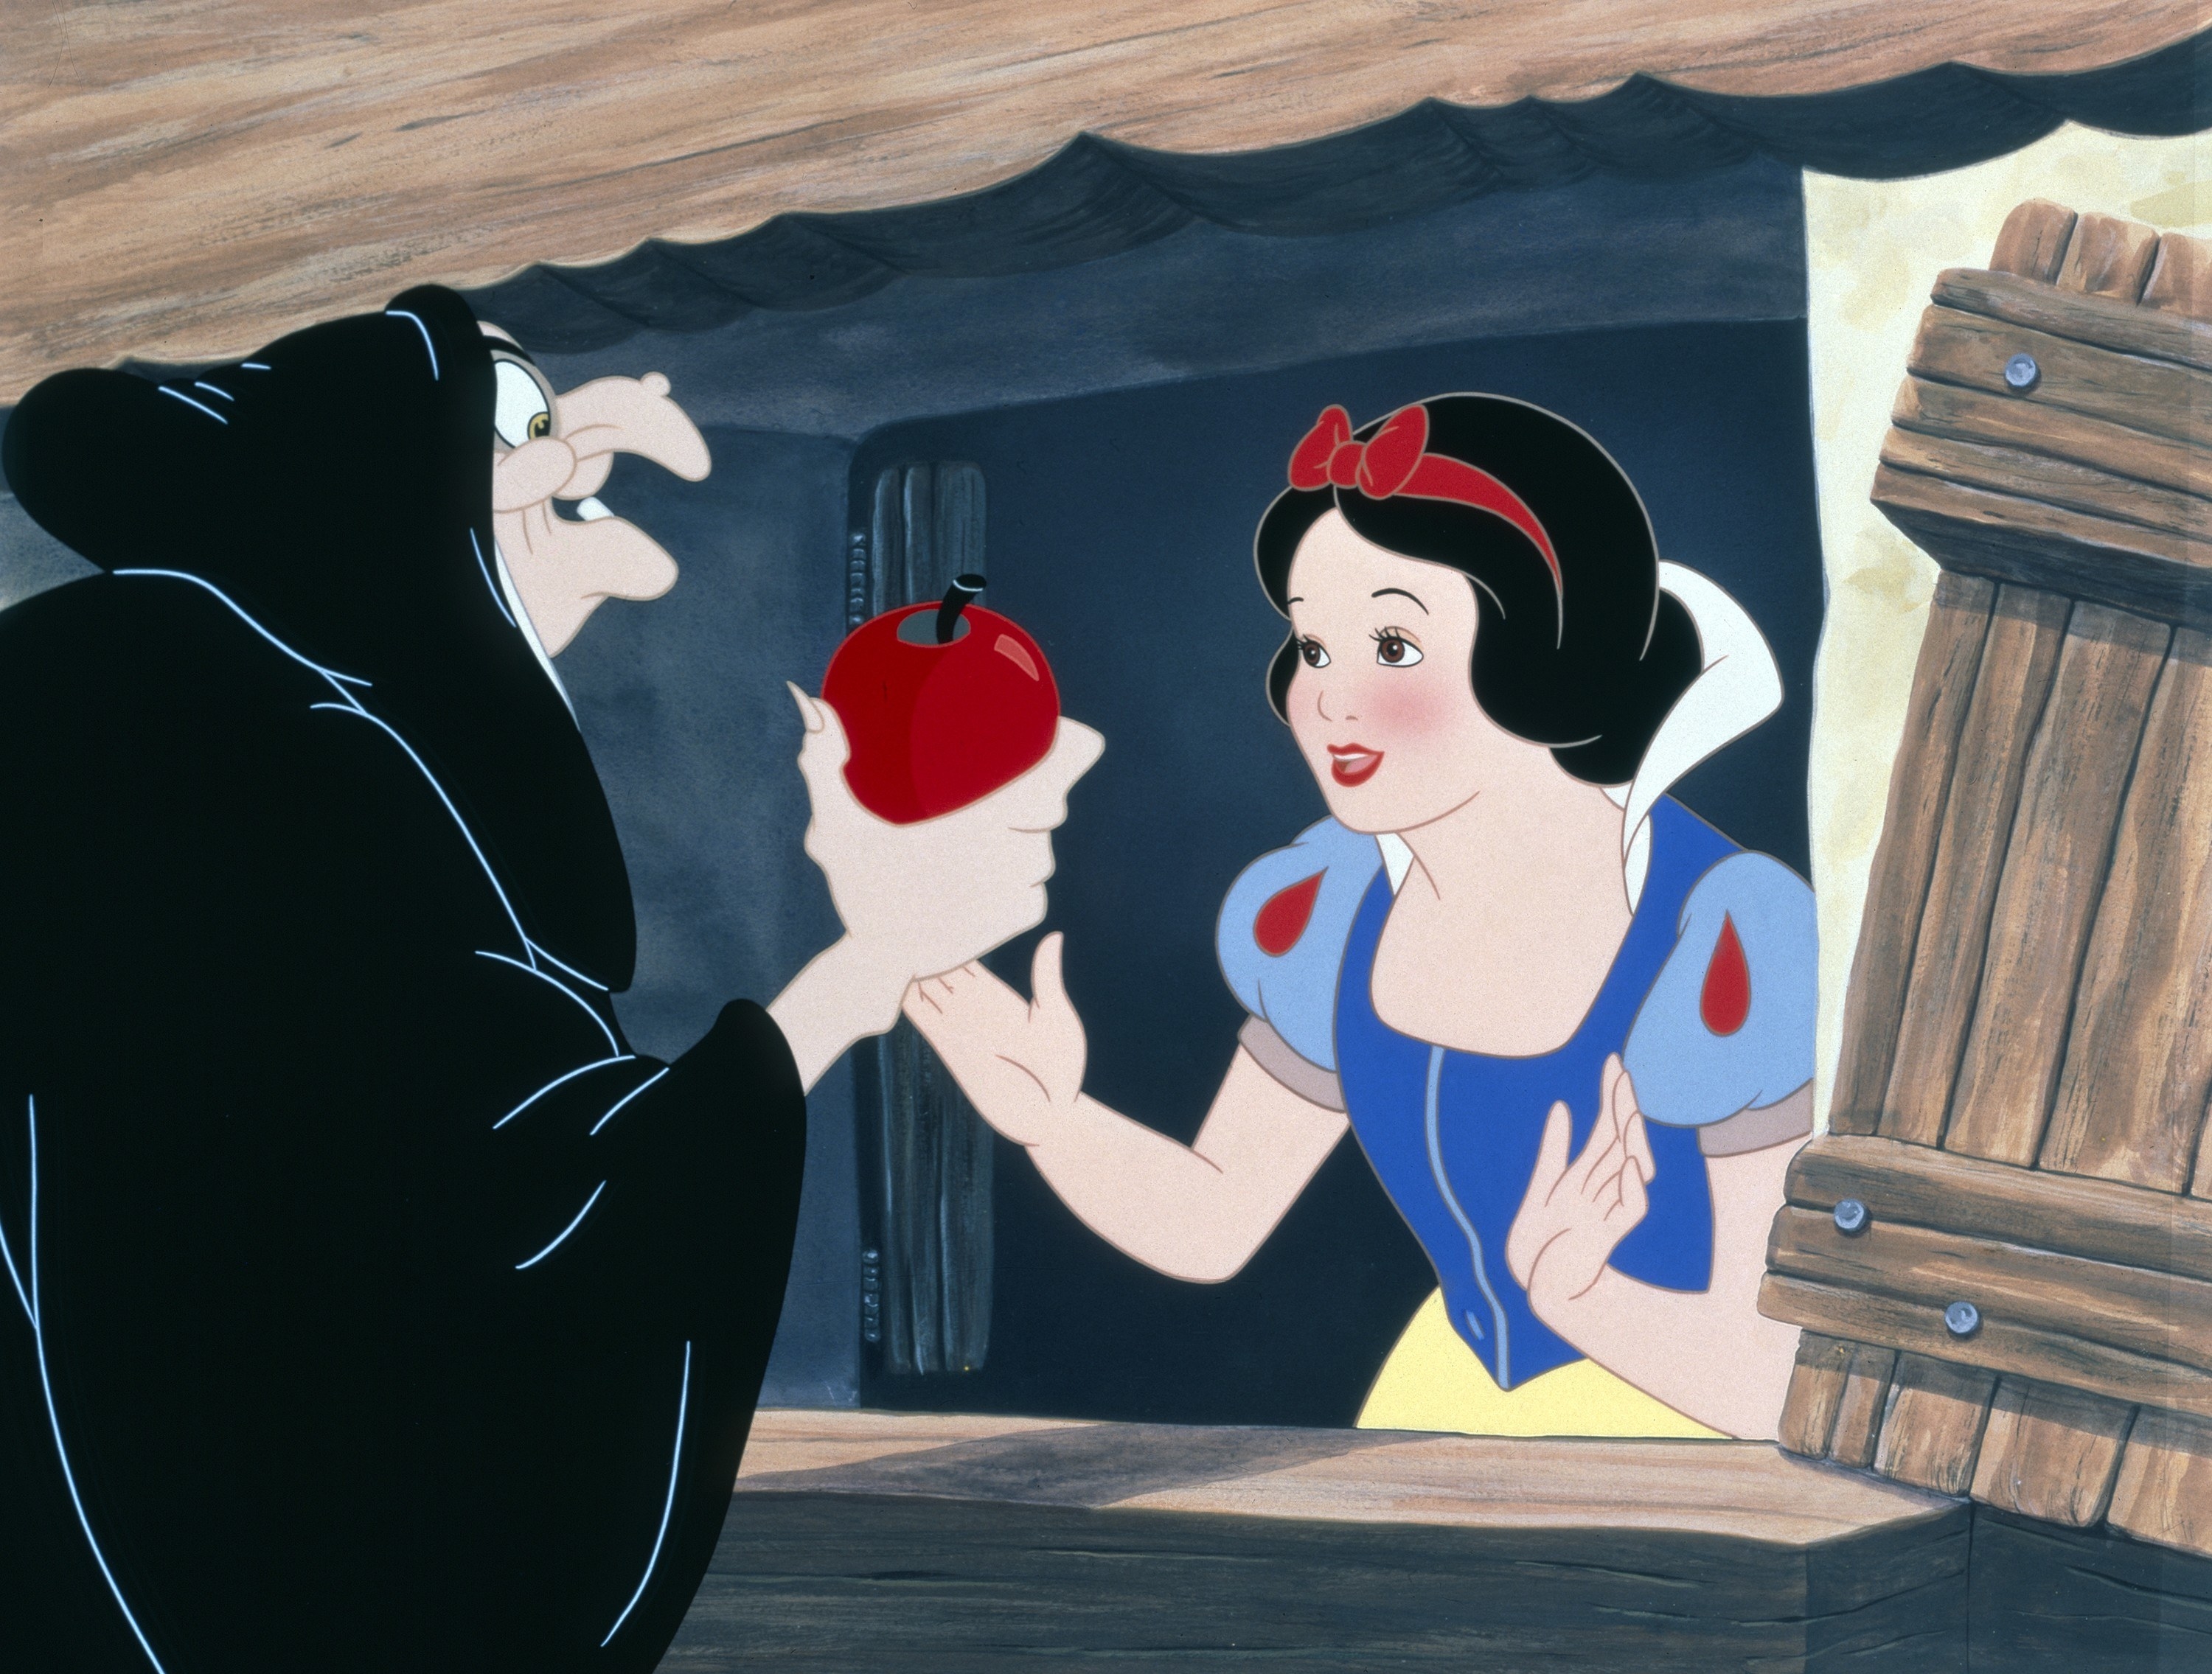 the Witch (voice: Lucille La Verne), Snow White (voice: Adriana Caselotti) from the 1937 animated film